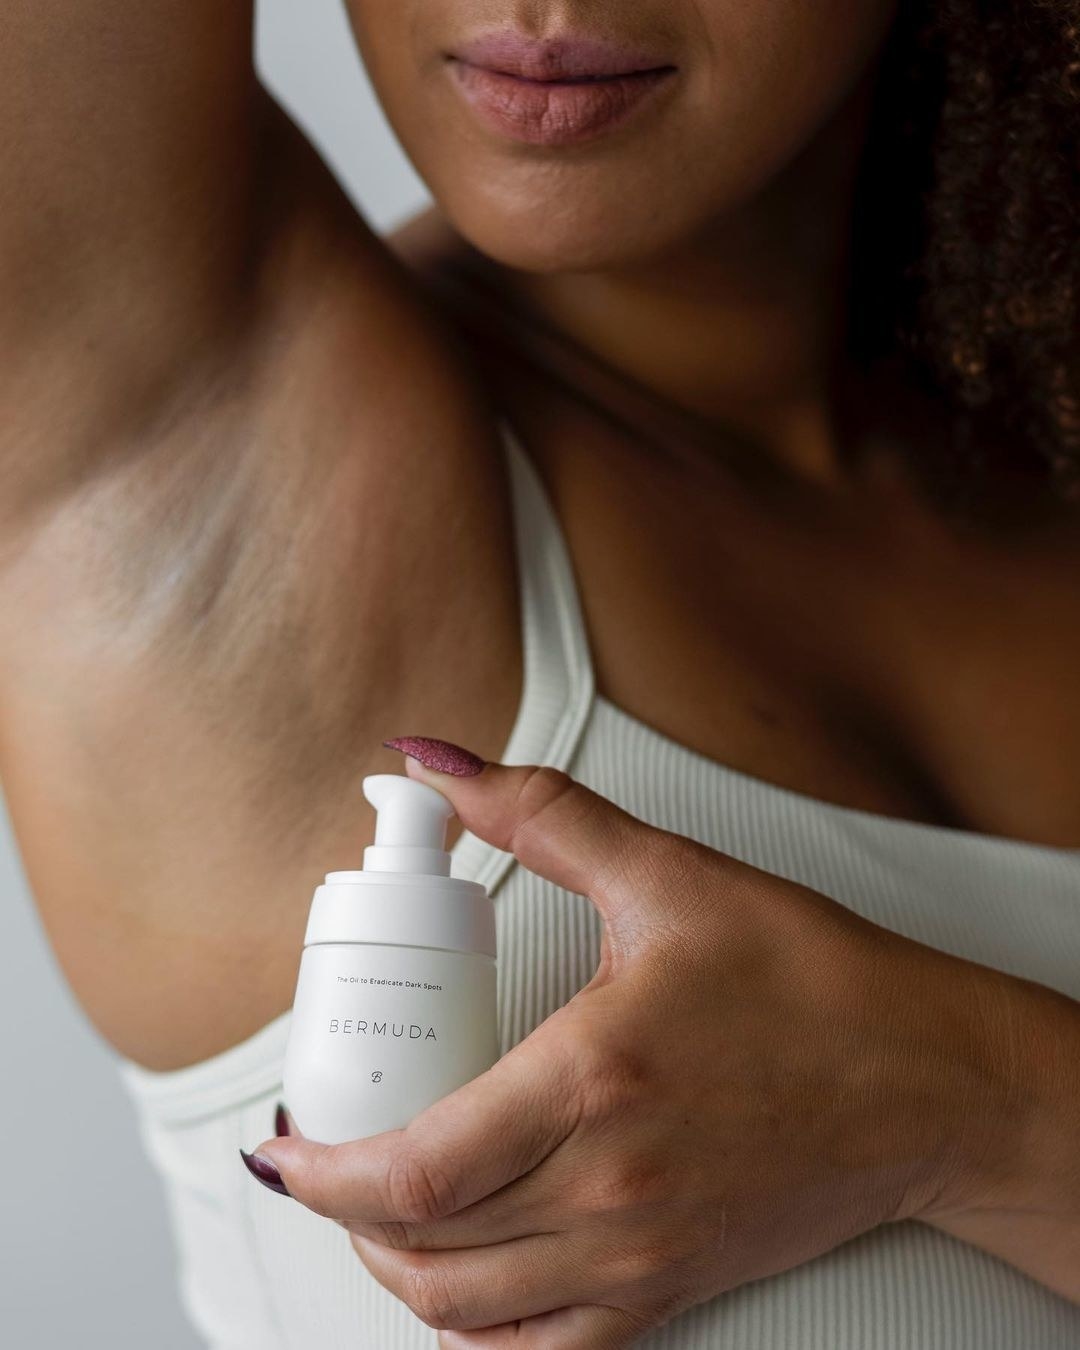 A person holding up a bottle of the treatment oil under their armpit